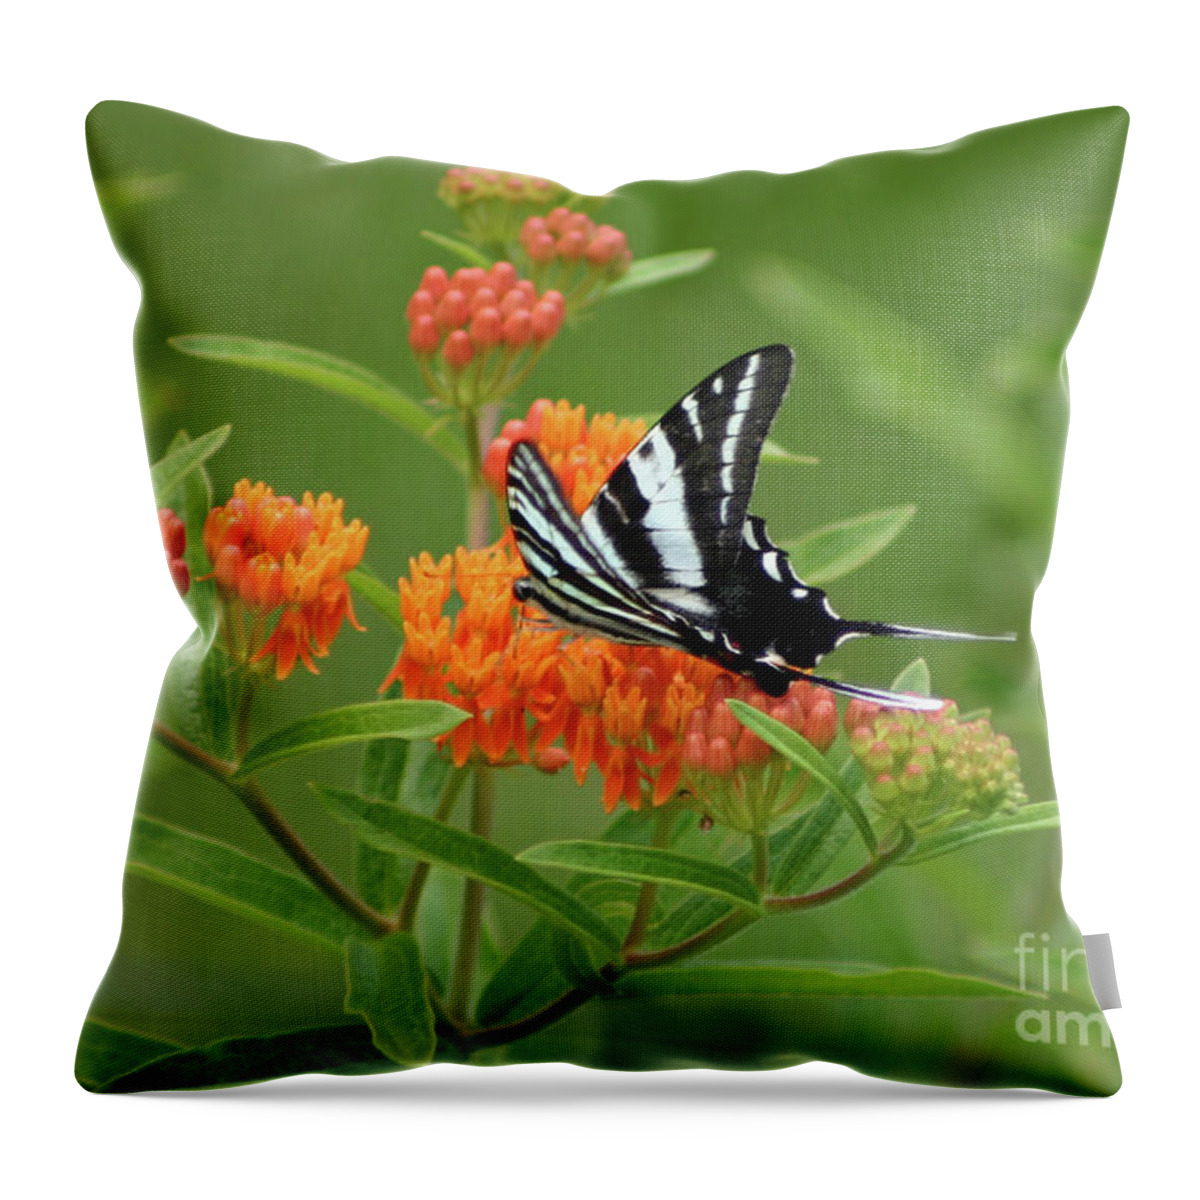 Zebra Swallowtail Butterfly Throw Pillow featuring the photograph Zebra Swallowtail Butterfly 15264_v1 by Robert E Alter Reflections of Infinity